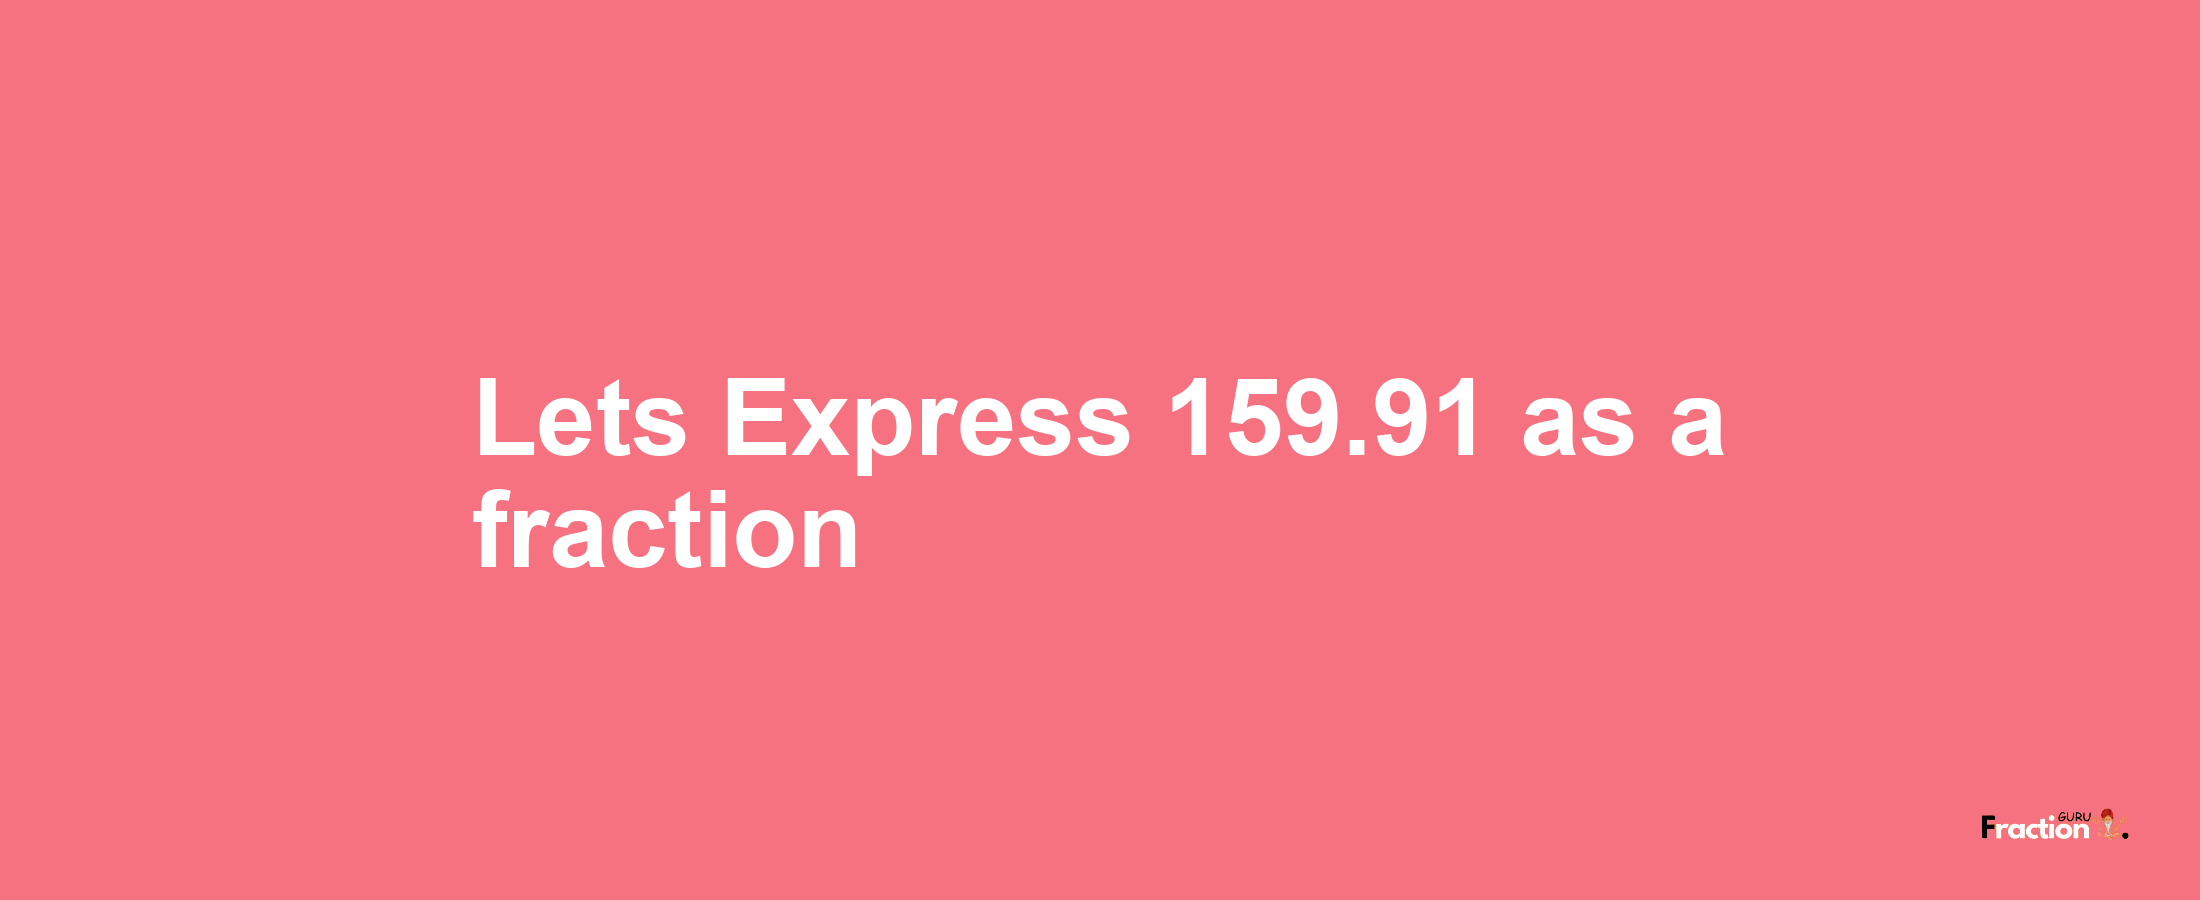 Lets Express 159.91 as afraction